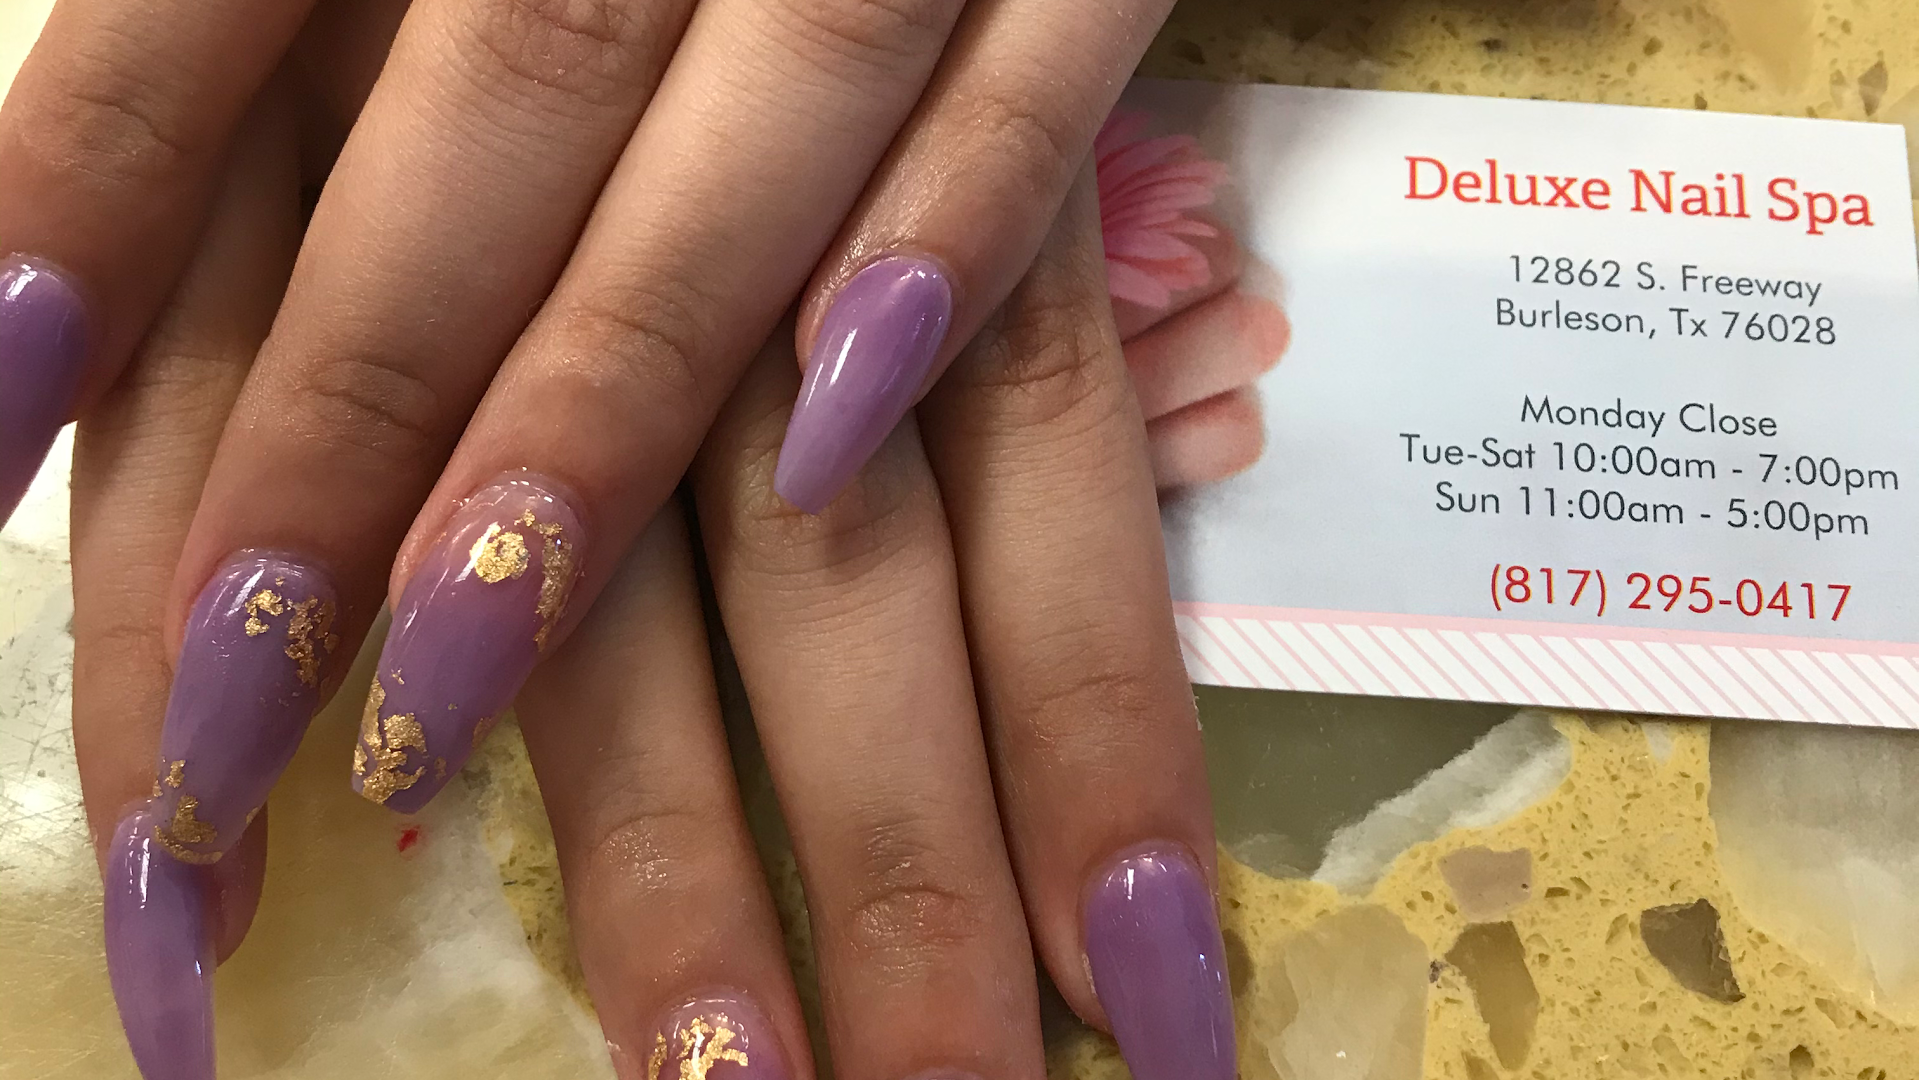 Deluxe Nails Spa